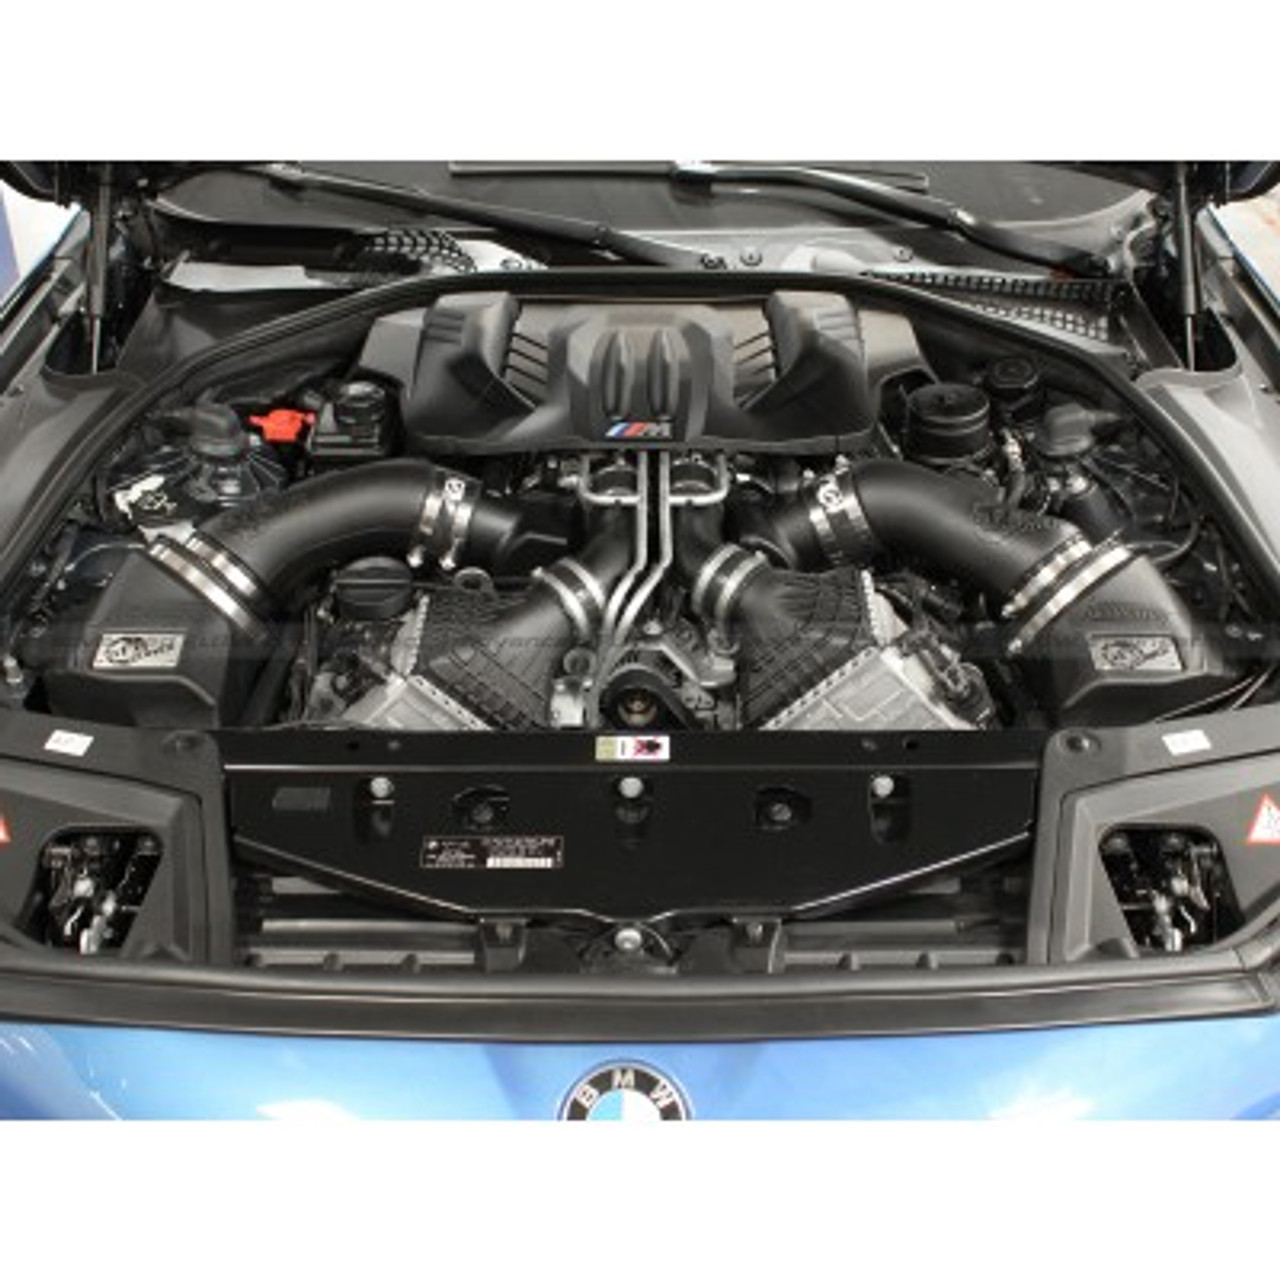 AFE Momentum PRO 5R Oil Stage 2 SI Intake 54-76301, 2012-2014 BMW F10 M5